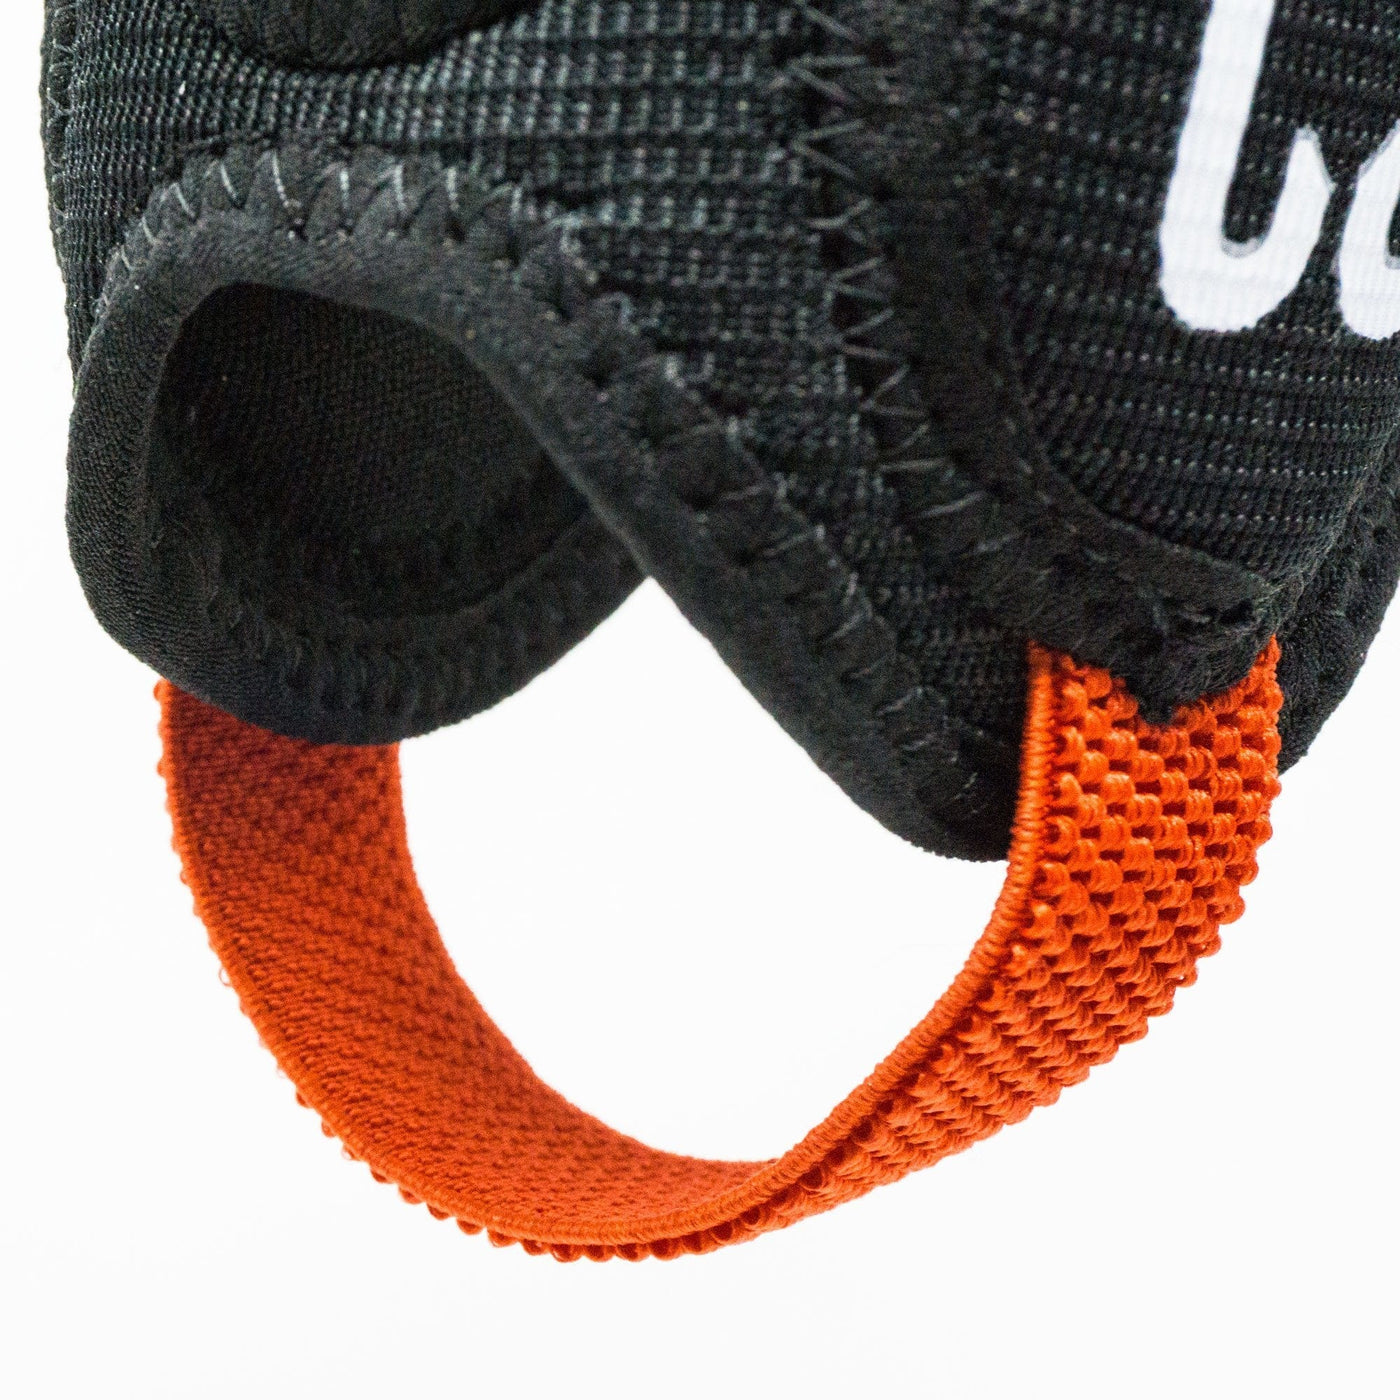 CORE Protection Ankle Guard  I Ankle Guards Zoomed In